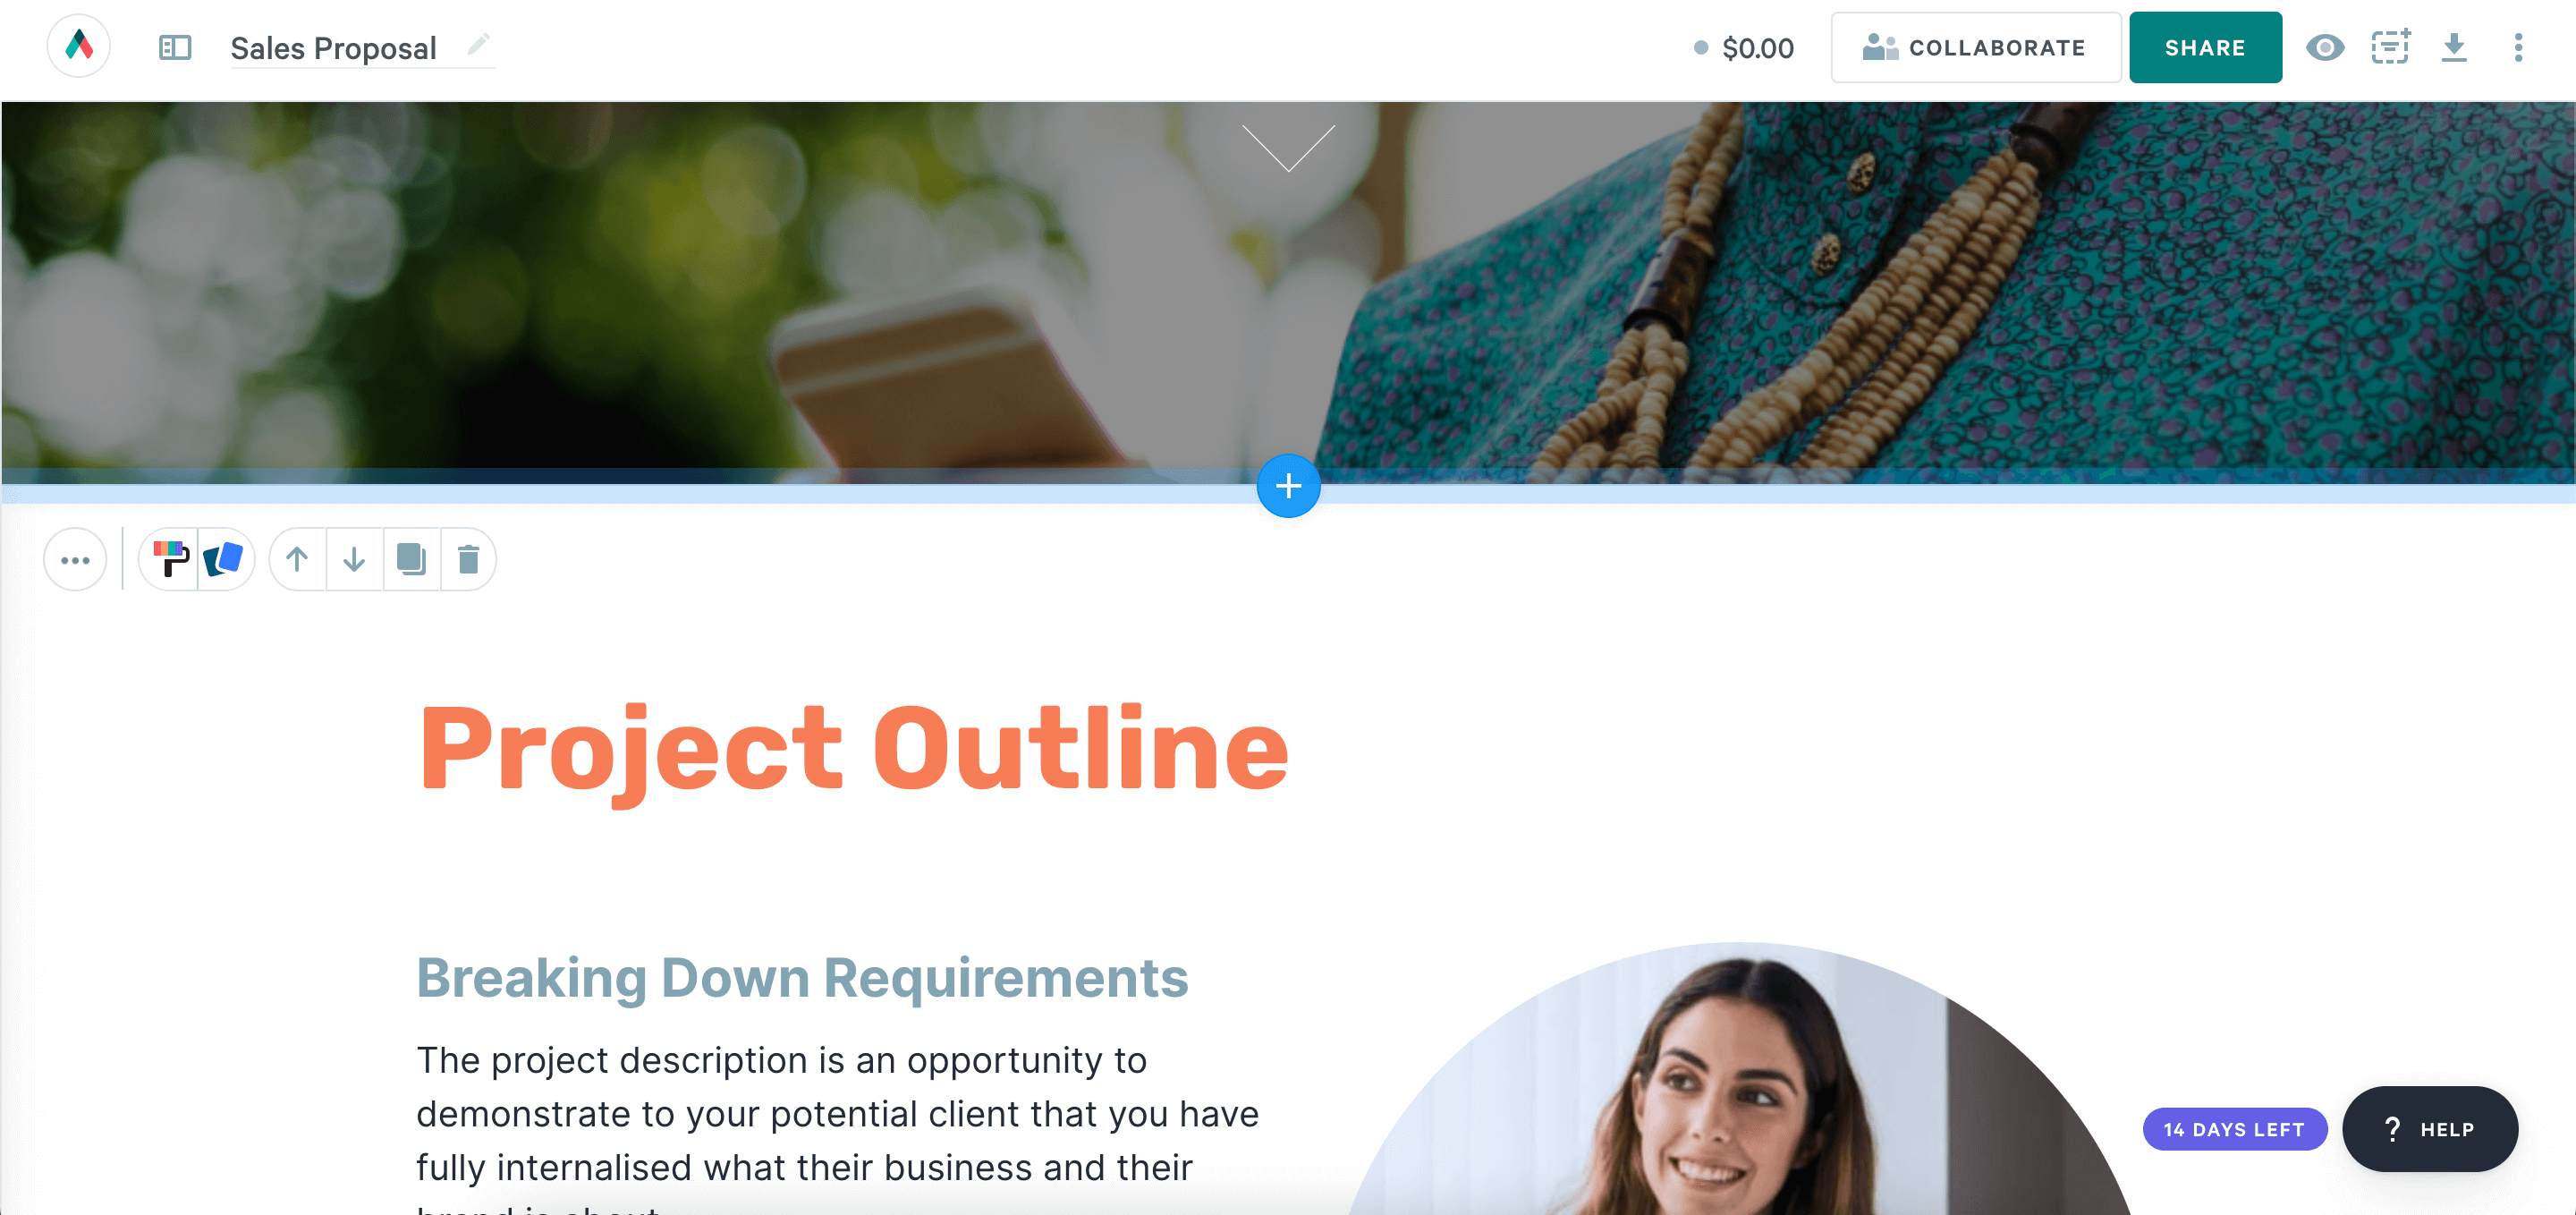 Qwilr is one of the best, easy-to-use proposal software for freelancers in 2023